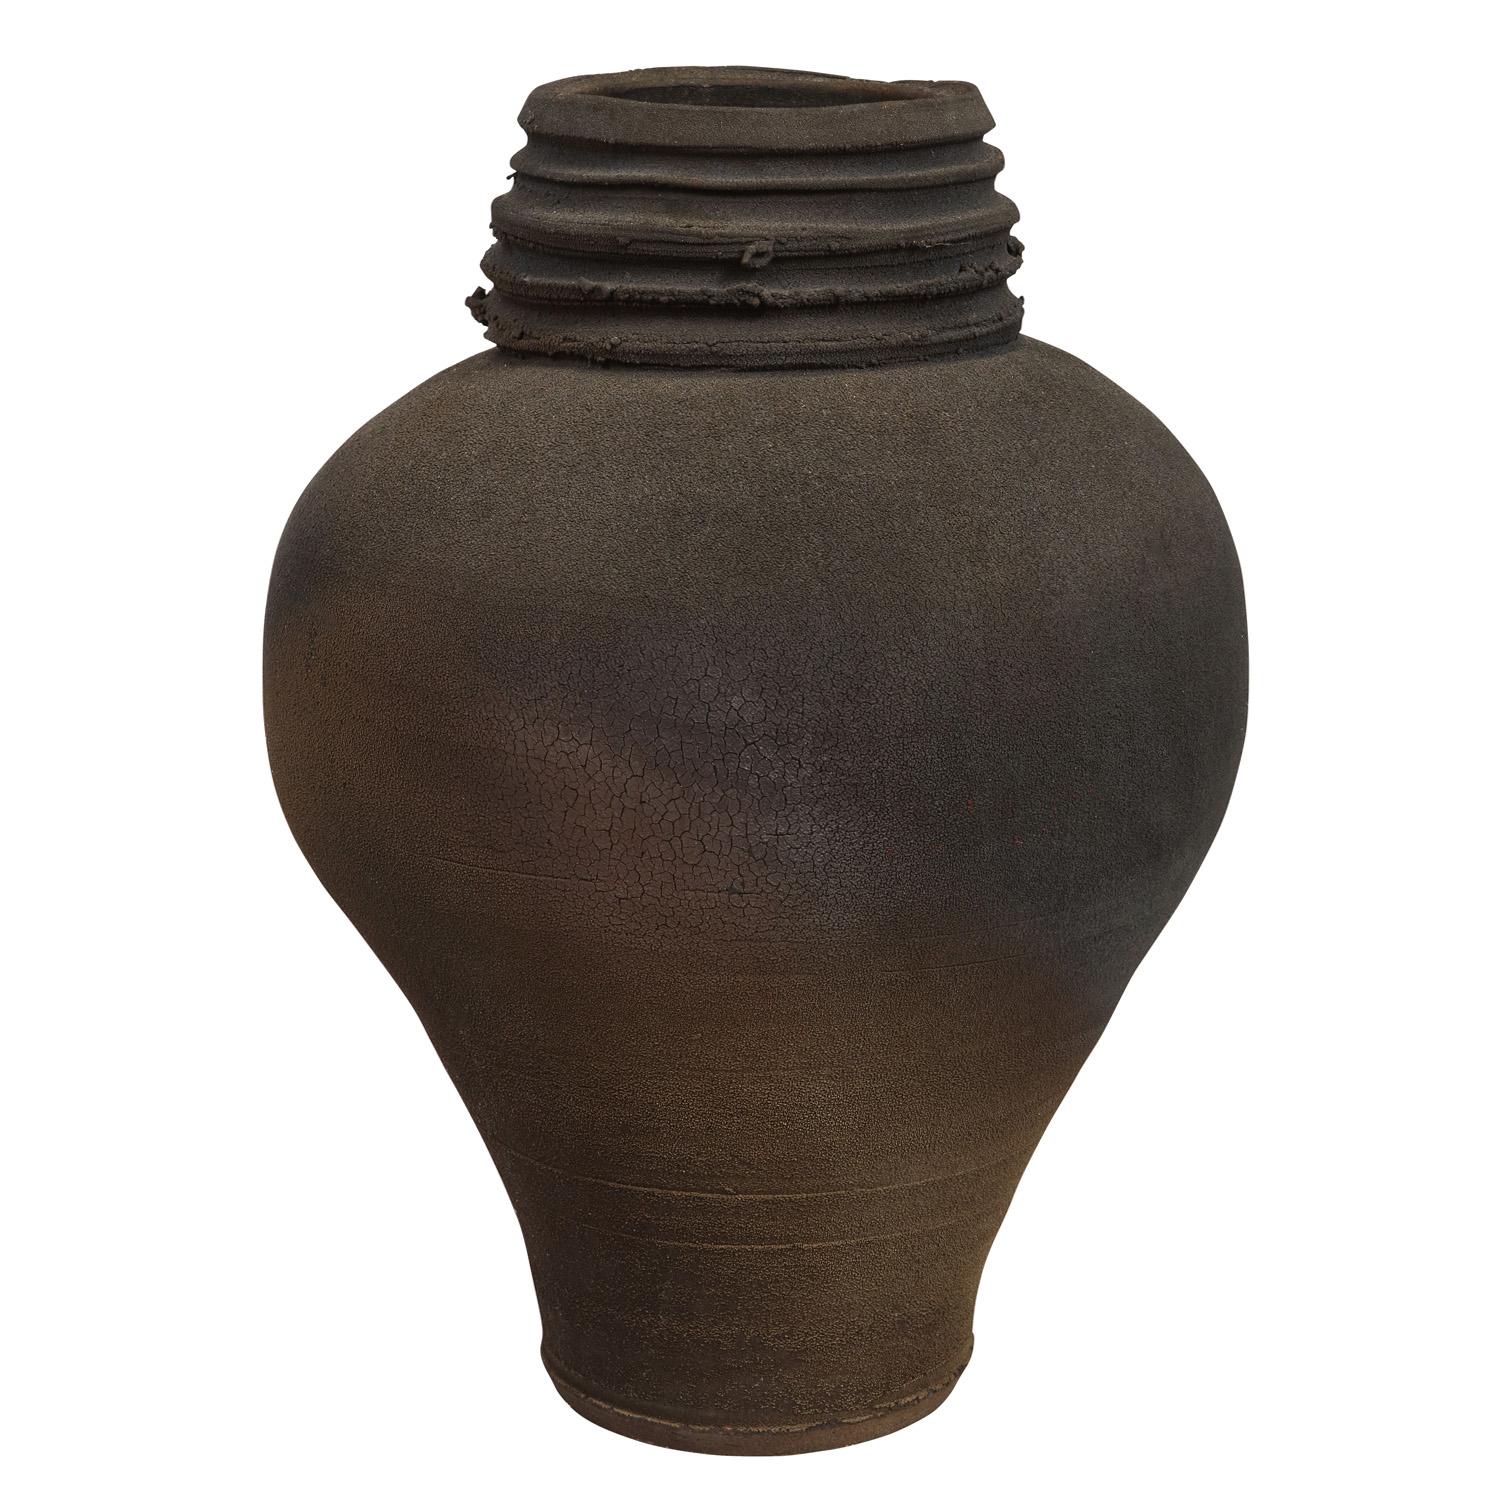 Large hand-thrown ceramic urn, undulating form with horizontal channeled top, by ceramicist Plotsky for Karl Springer, American 1981 (signed and dated 